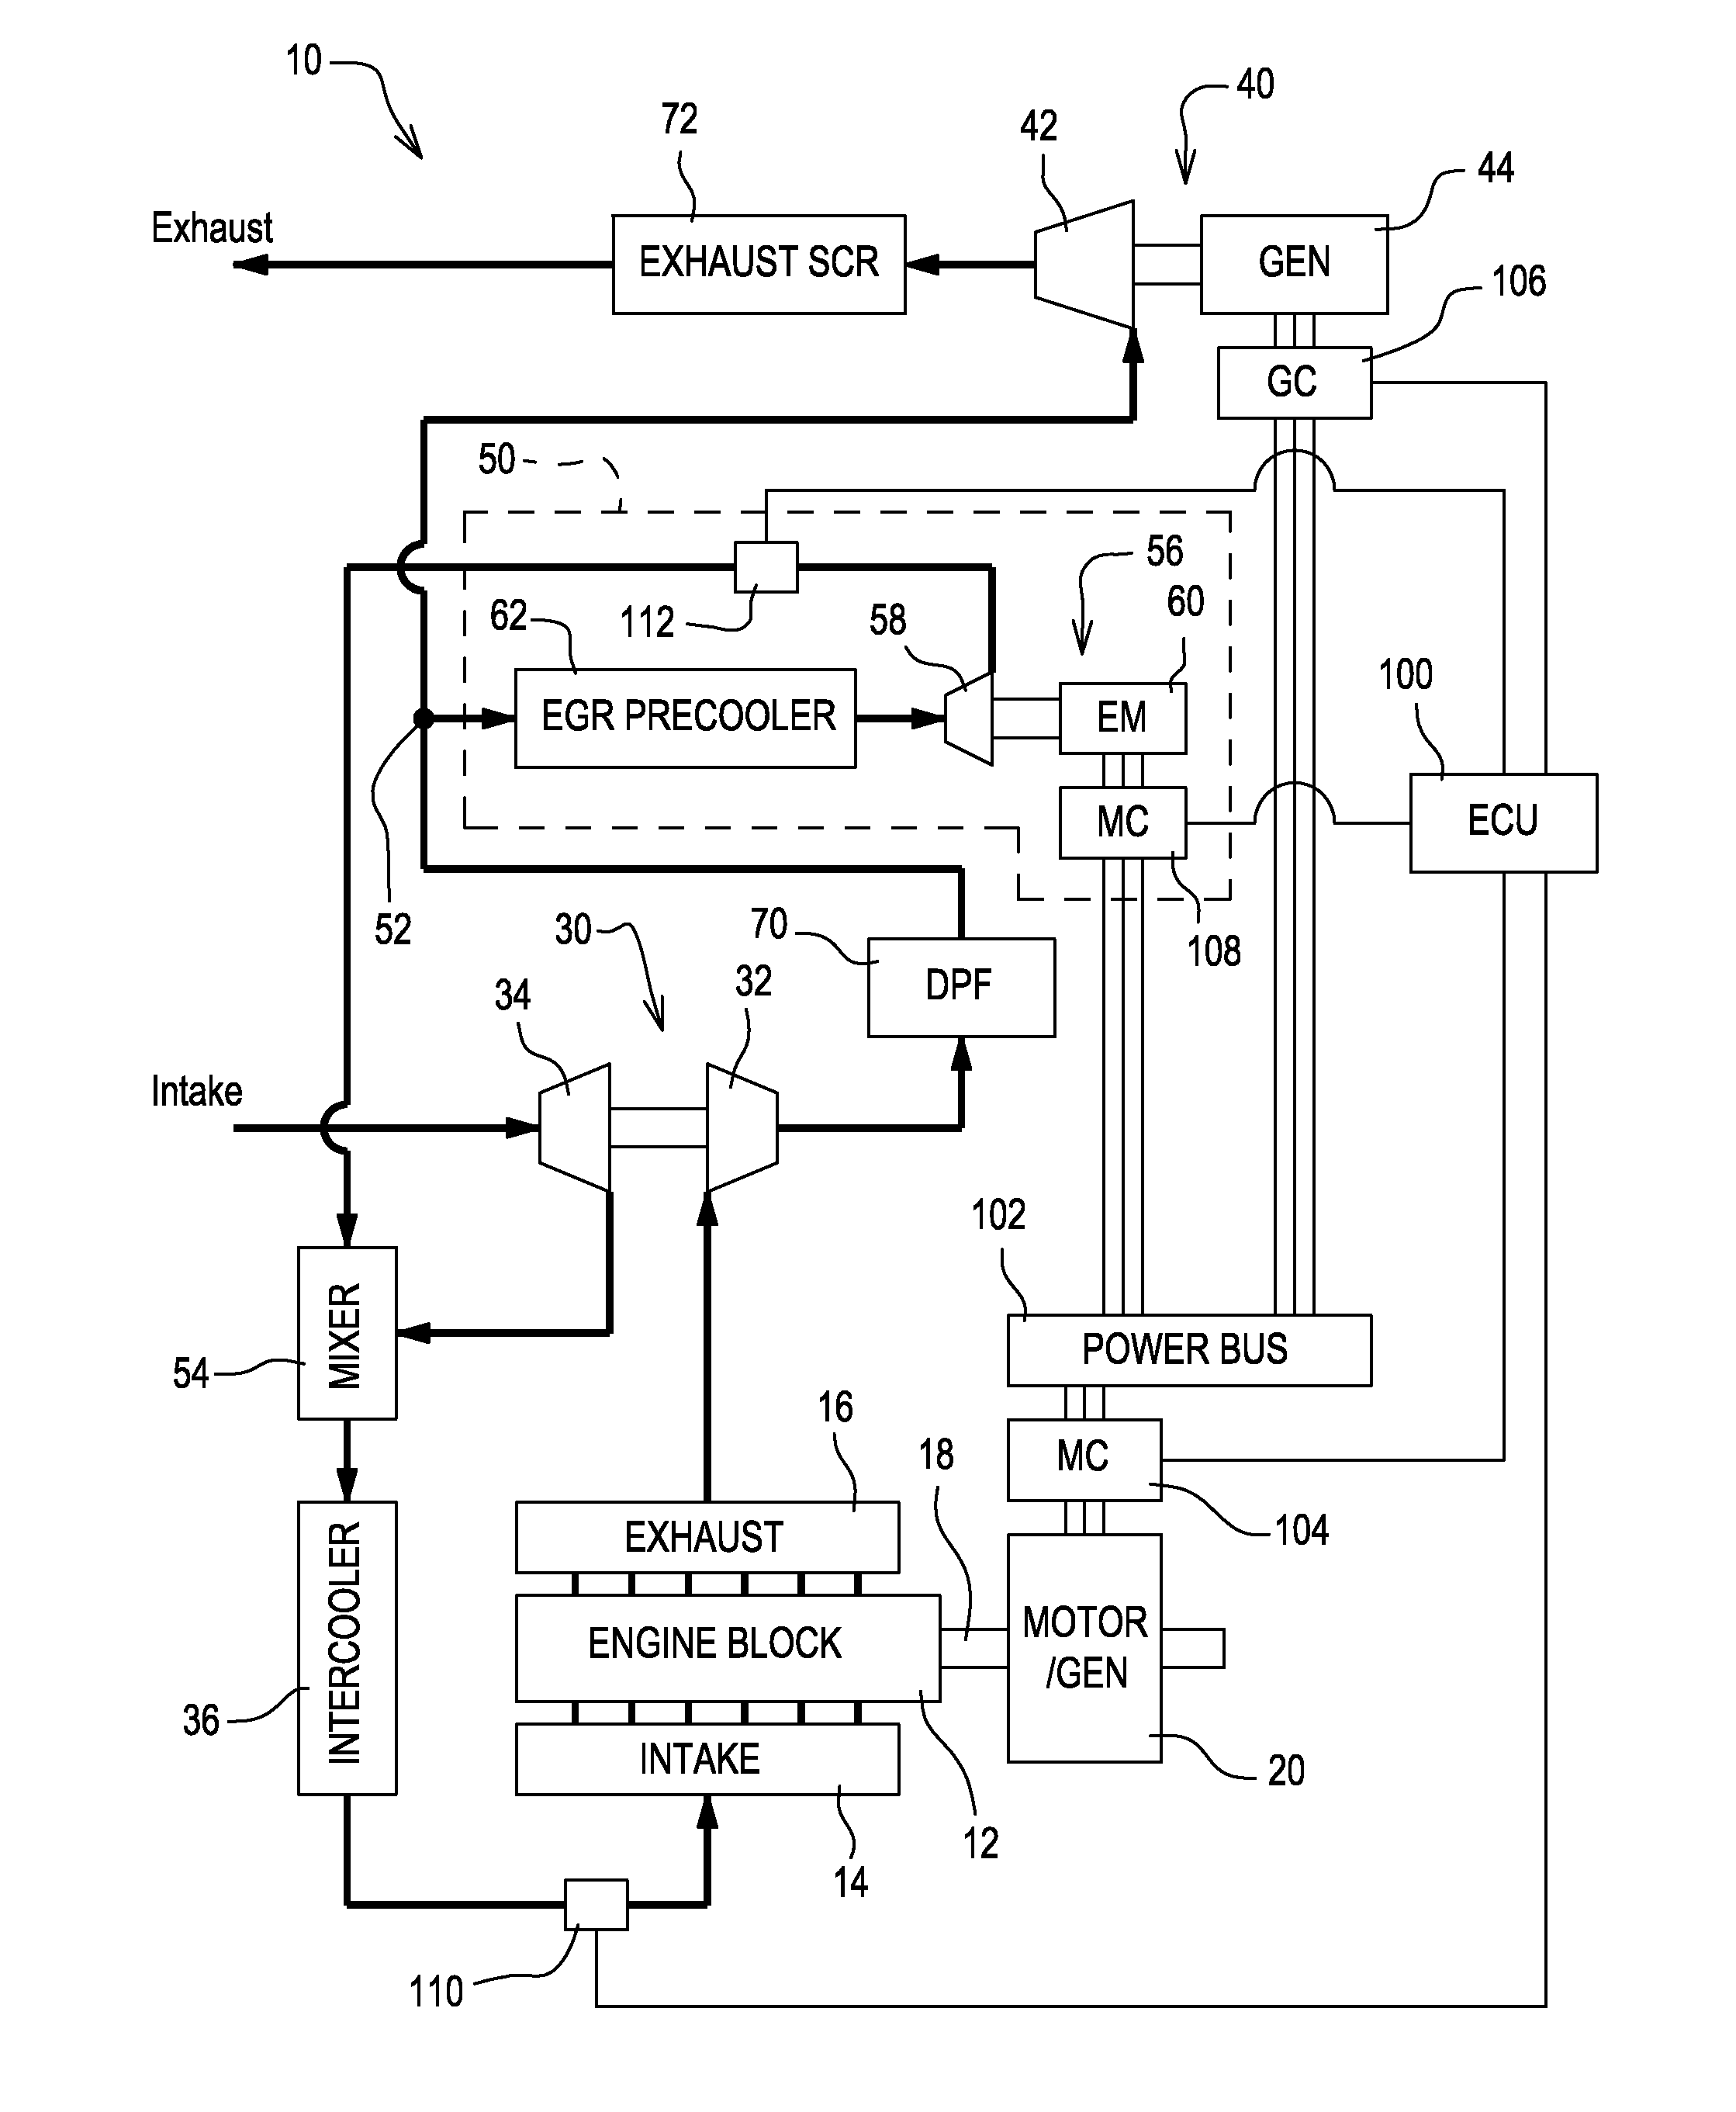 Metering exhaust gas recirculation system for a turbocharged engine having a turbogenerator system